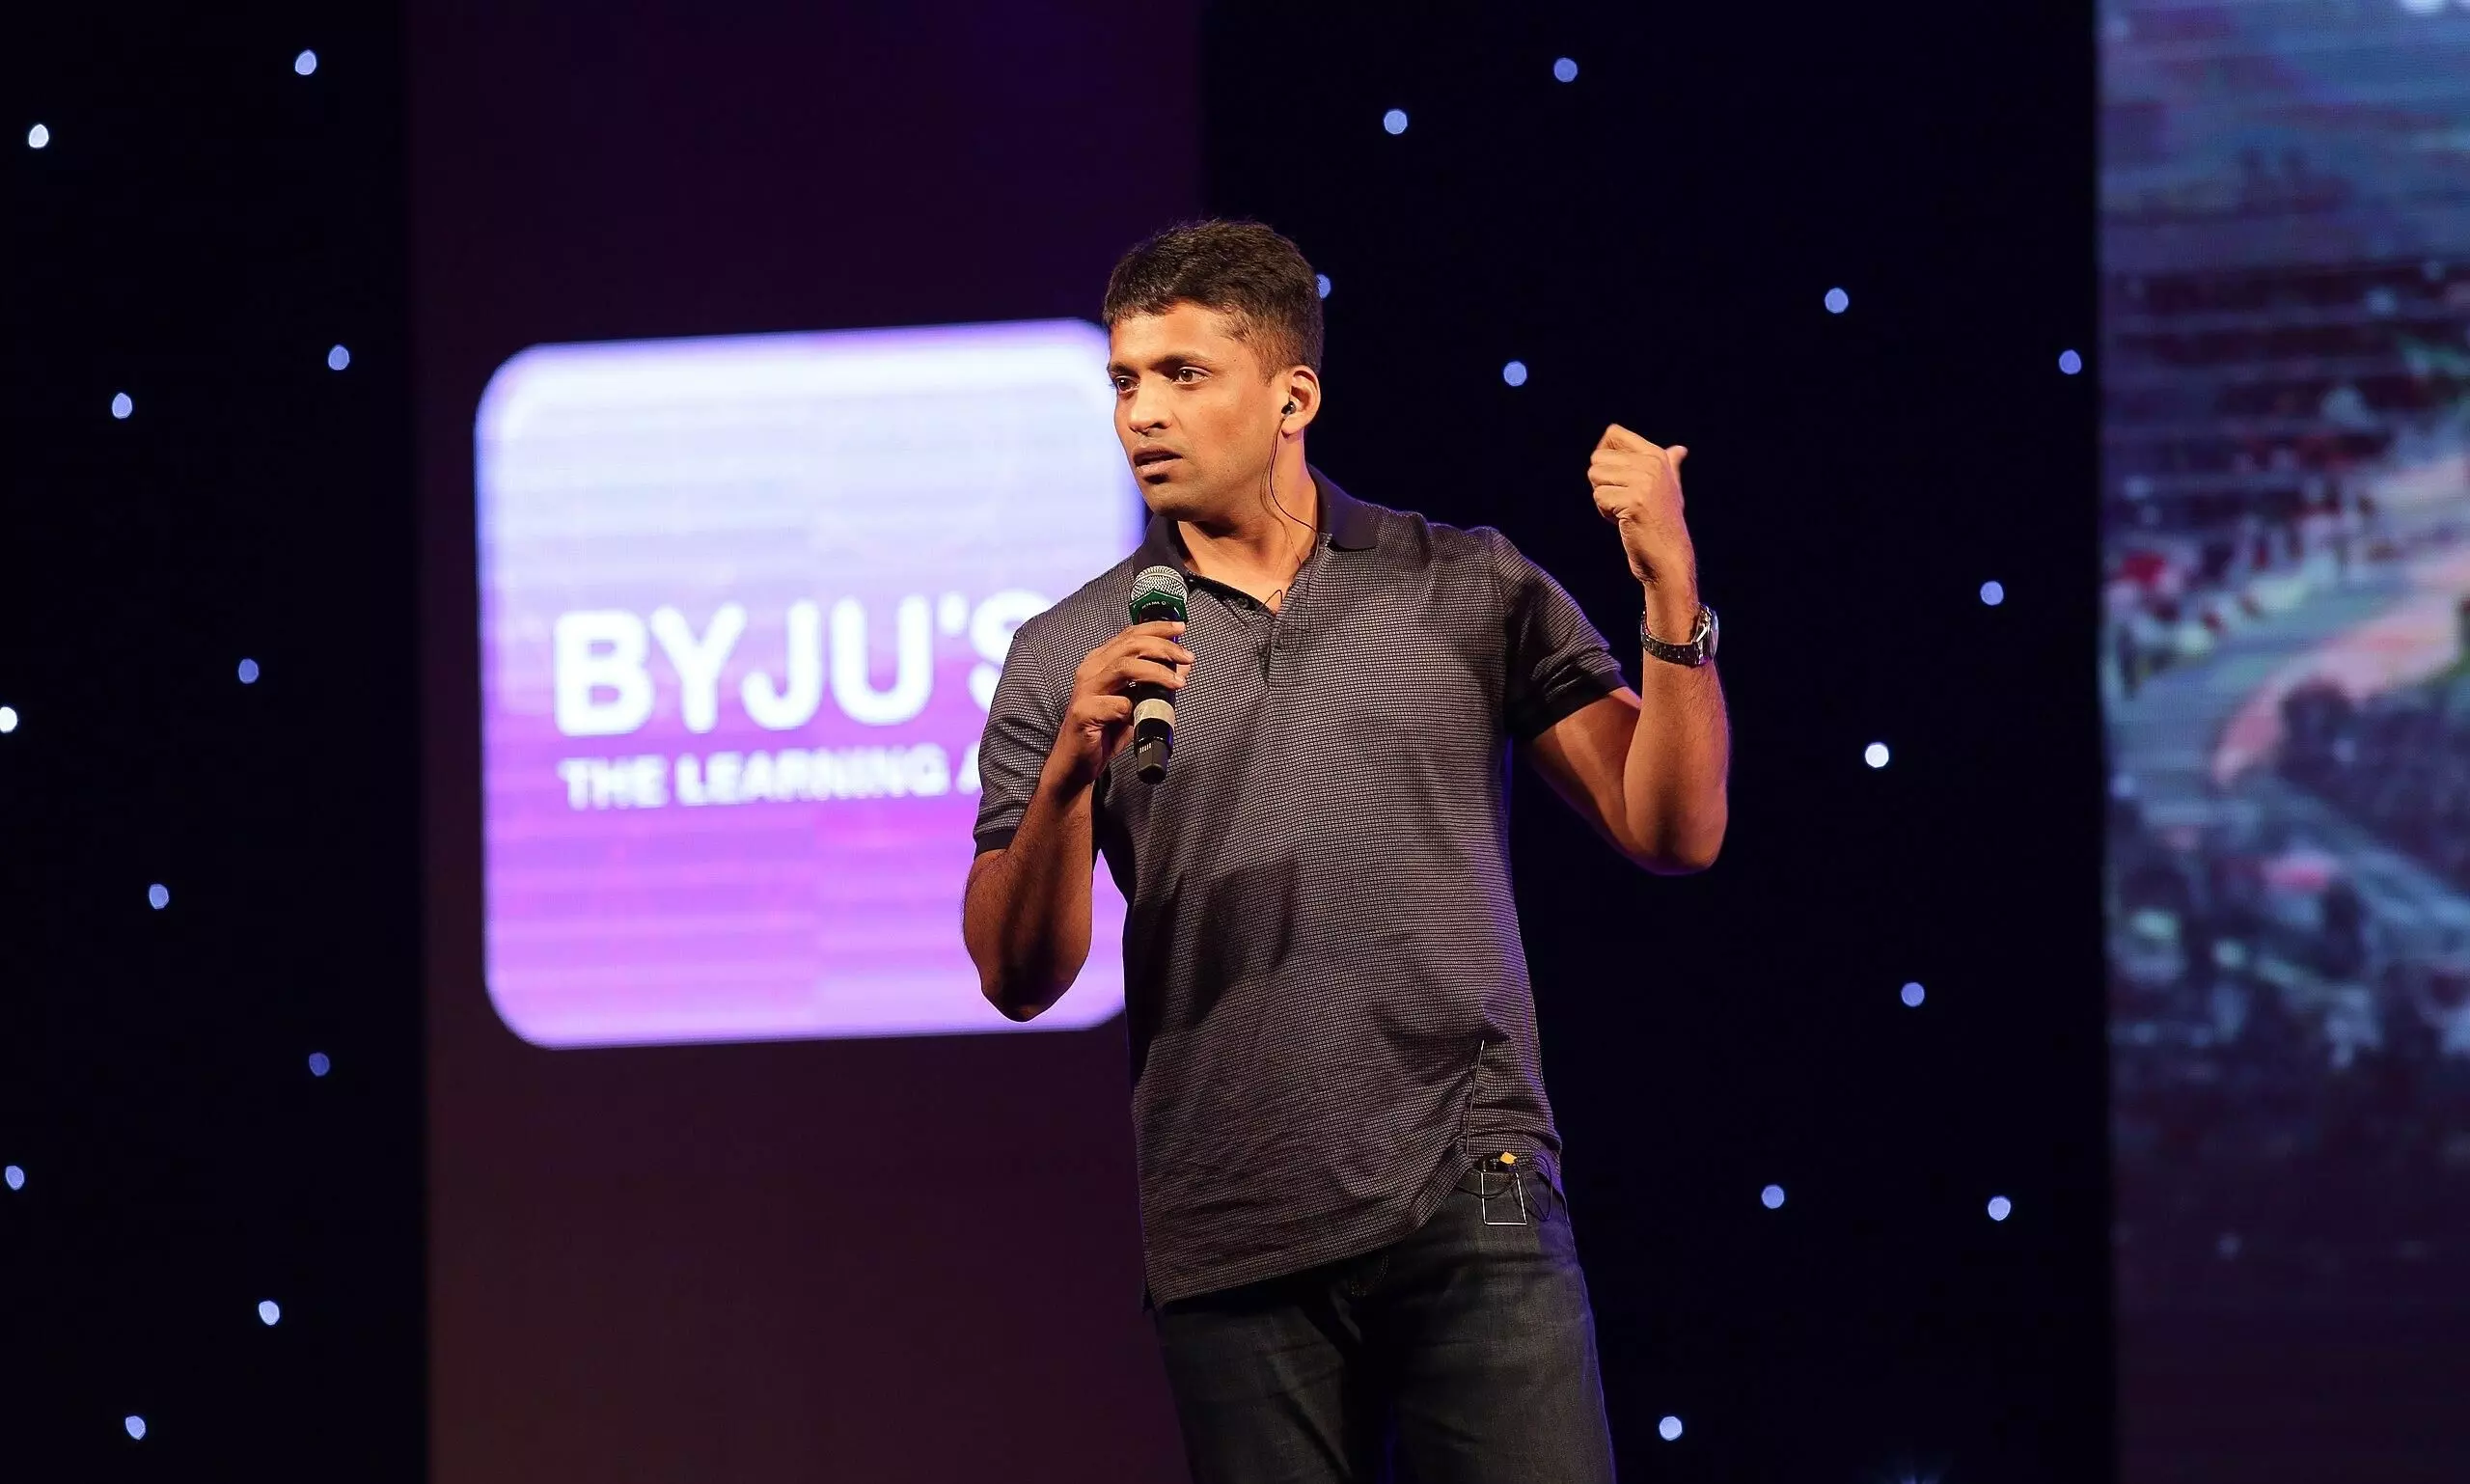 BYJUs investors meet to remove founders from the app